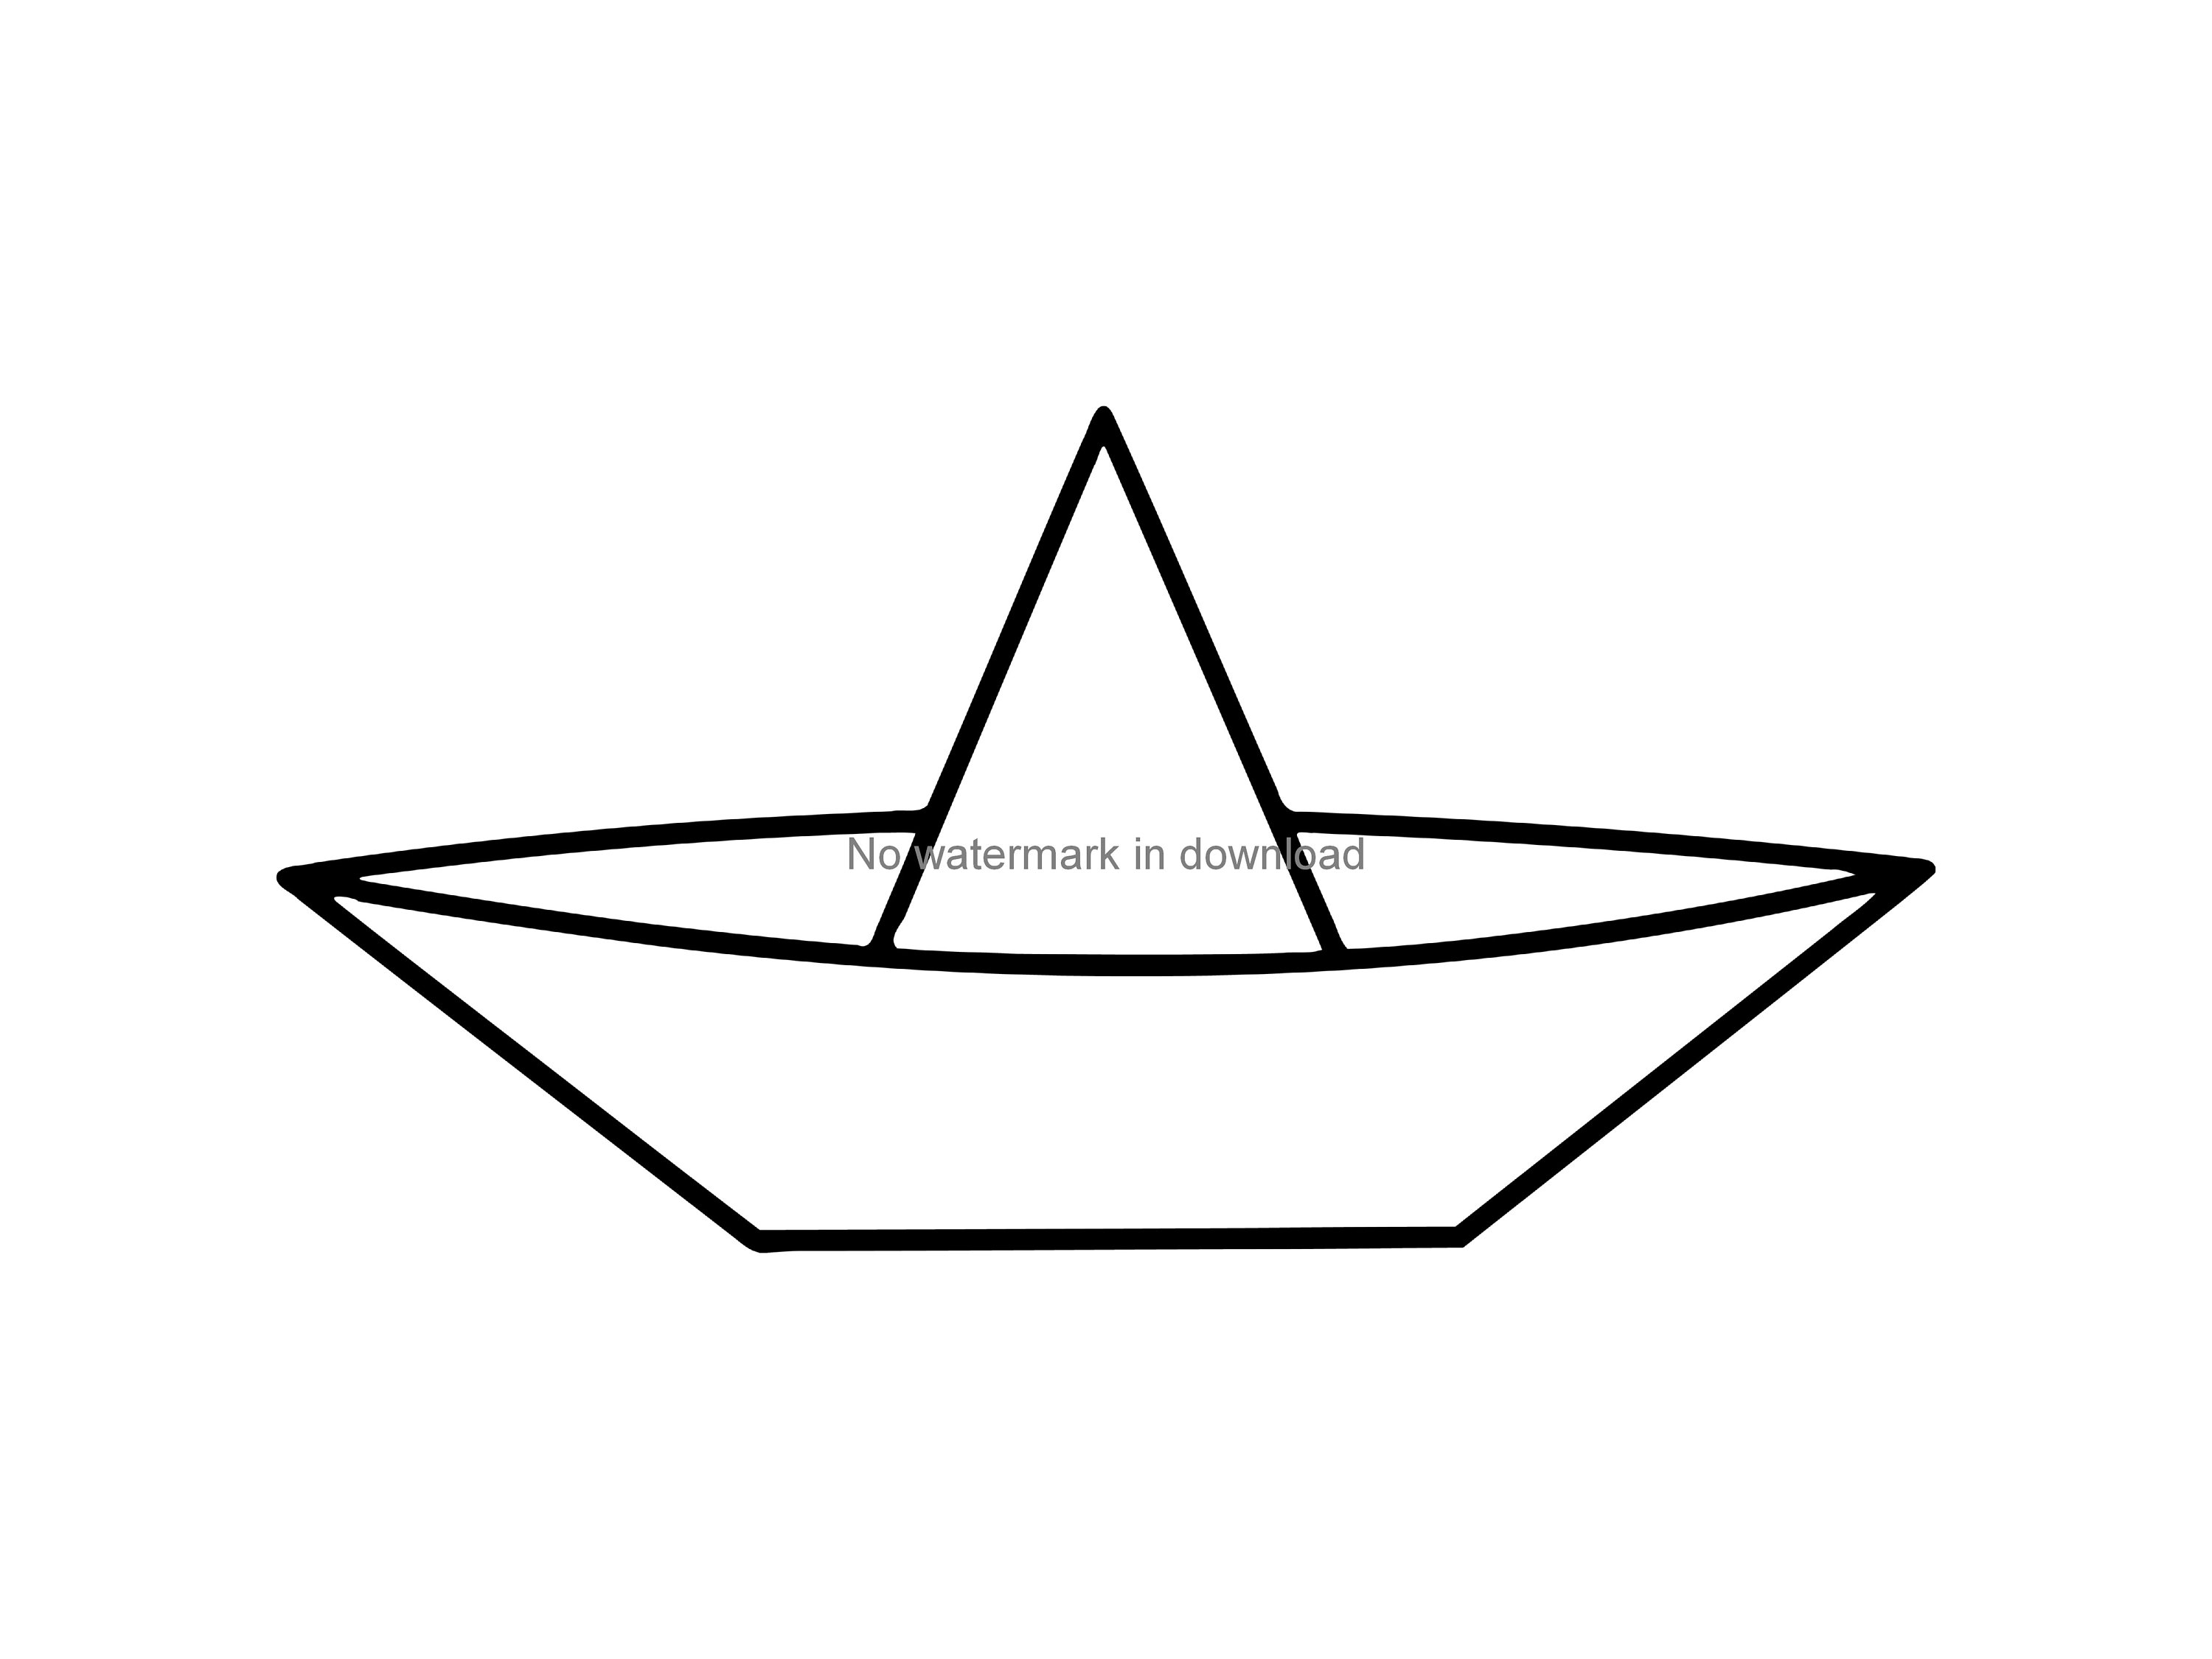 clipart boat hat